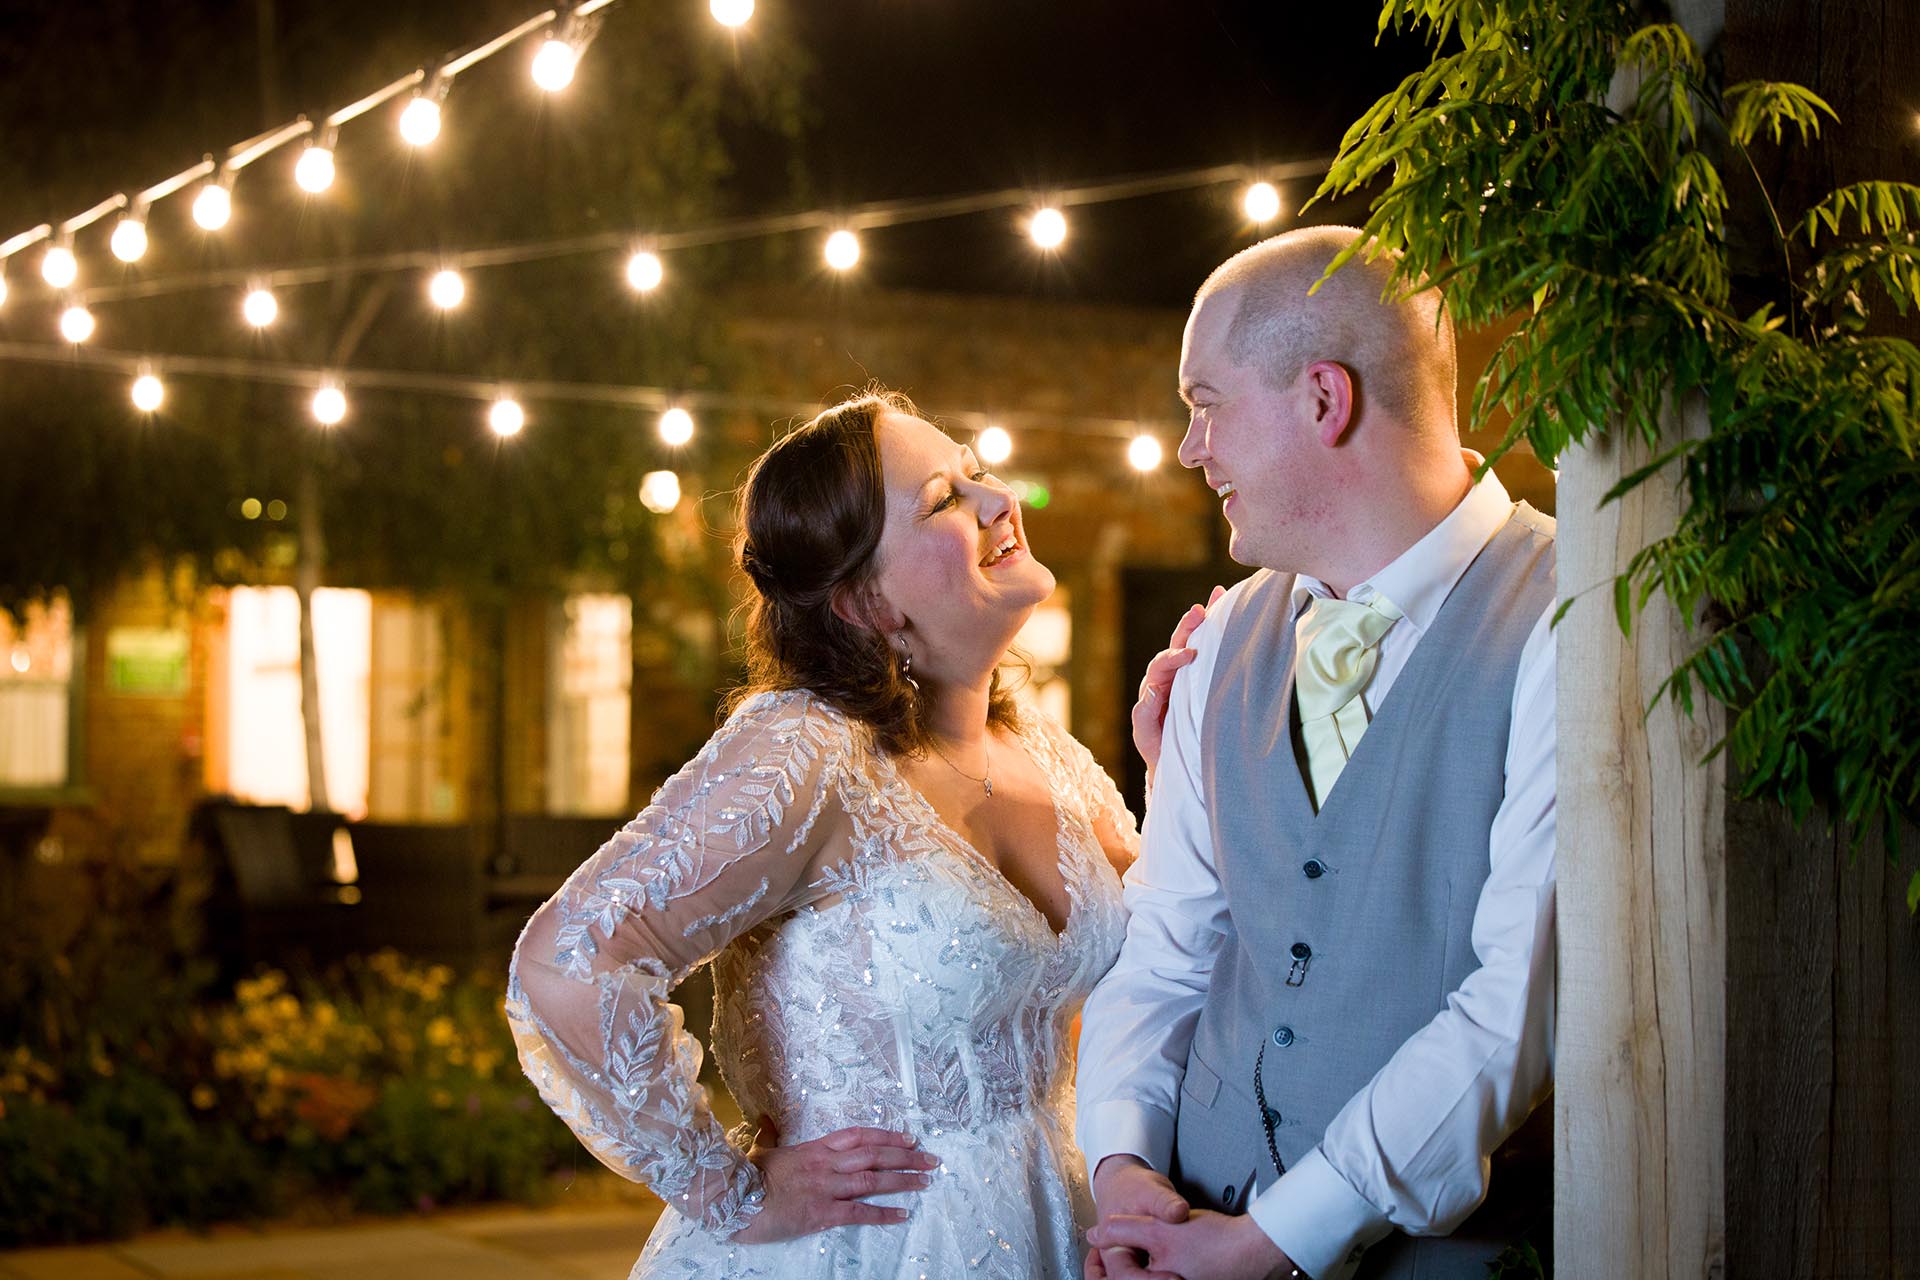 Bride and groom photograph at night by Essex wedding photographer at Mulberry House High Ongar